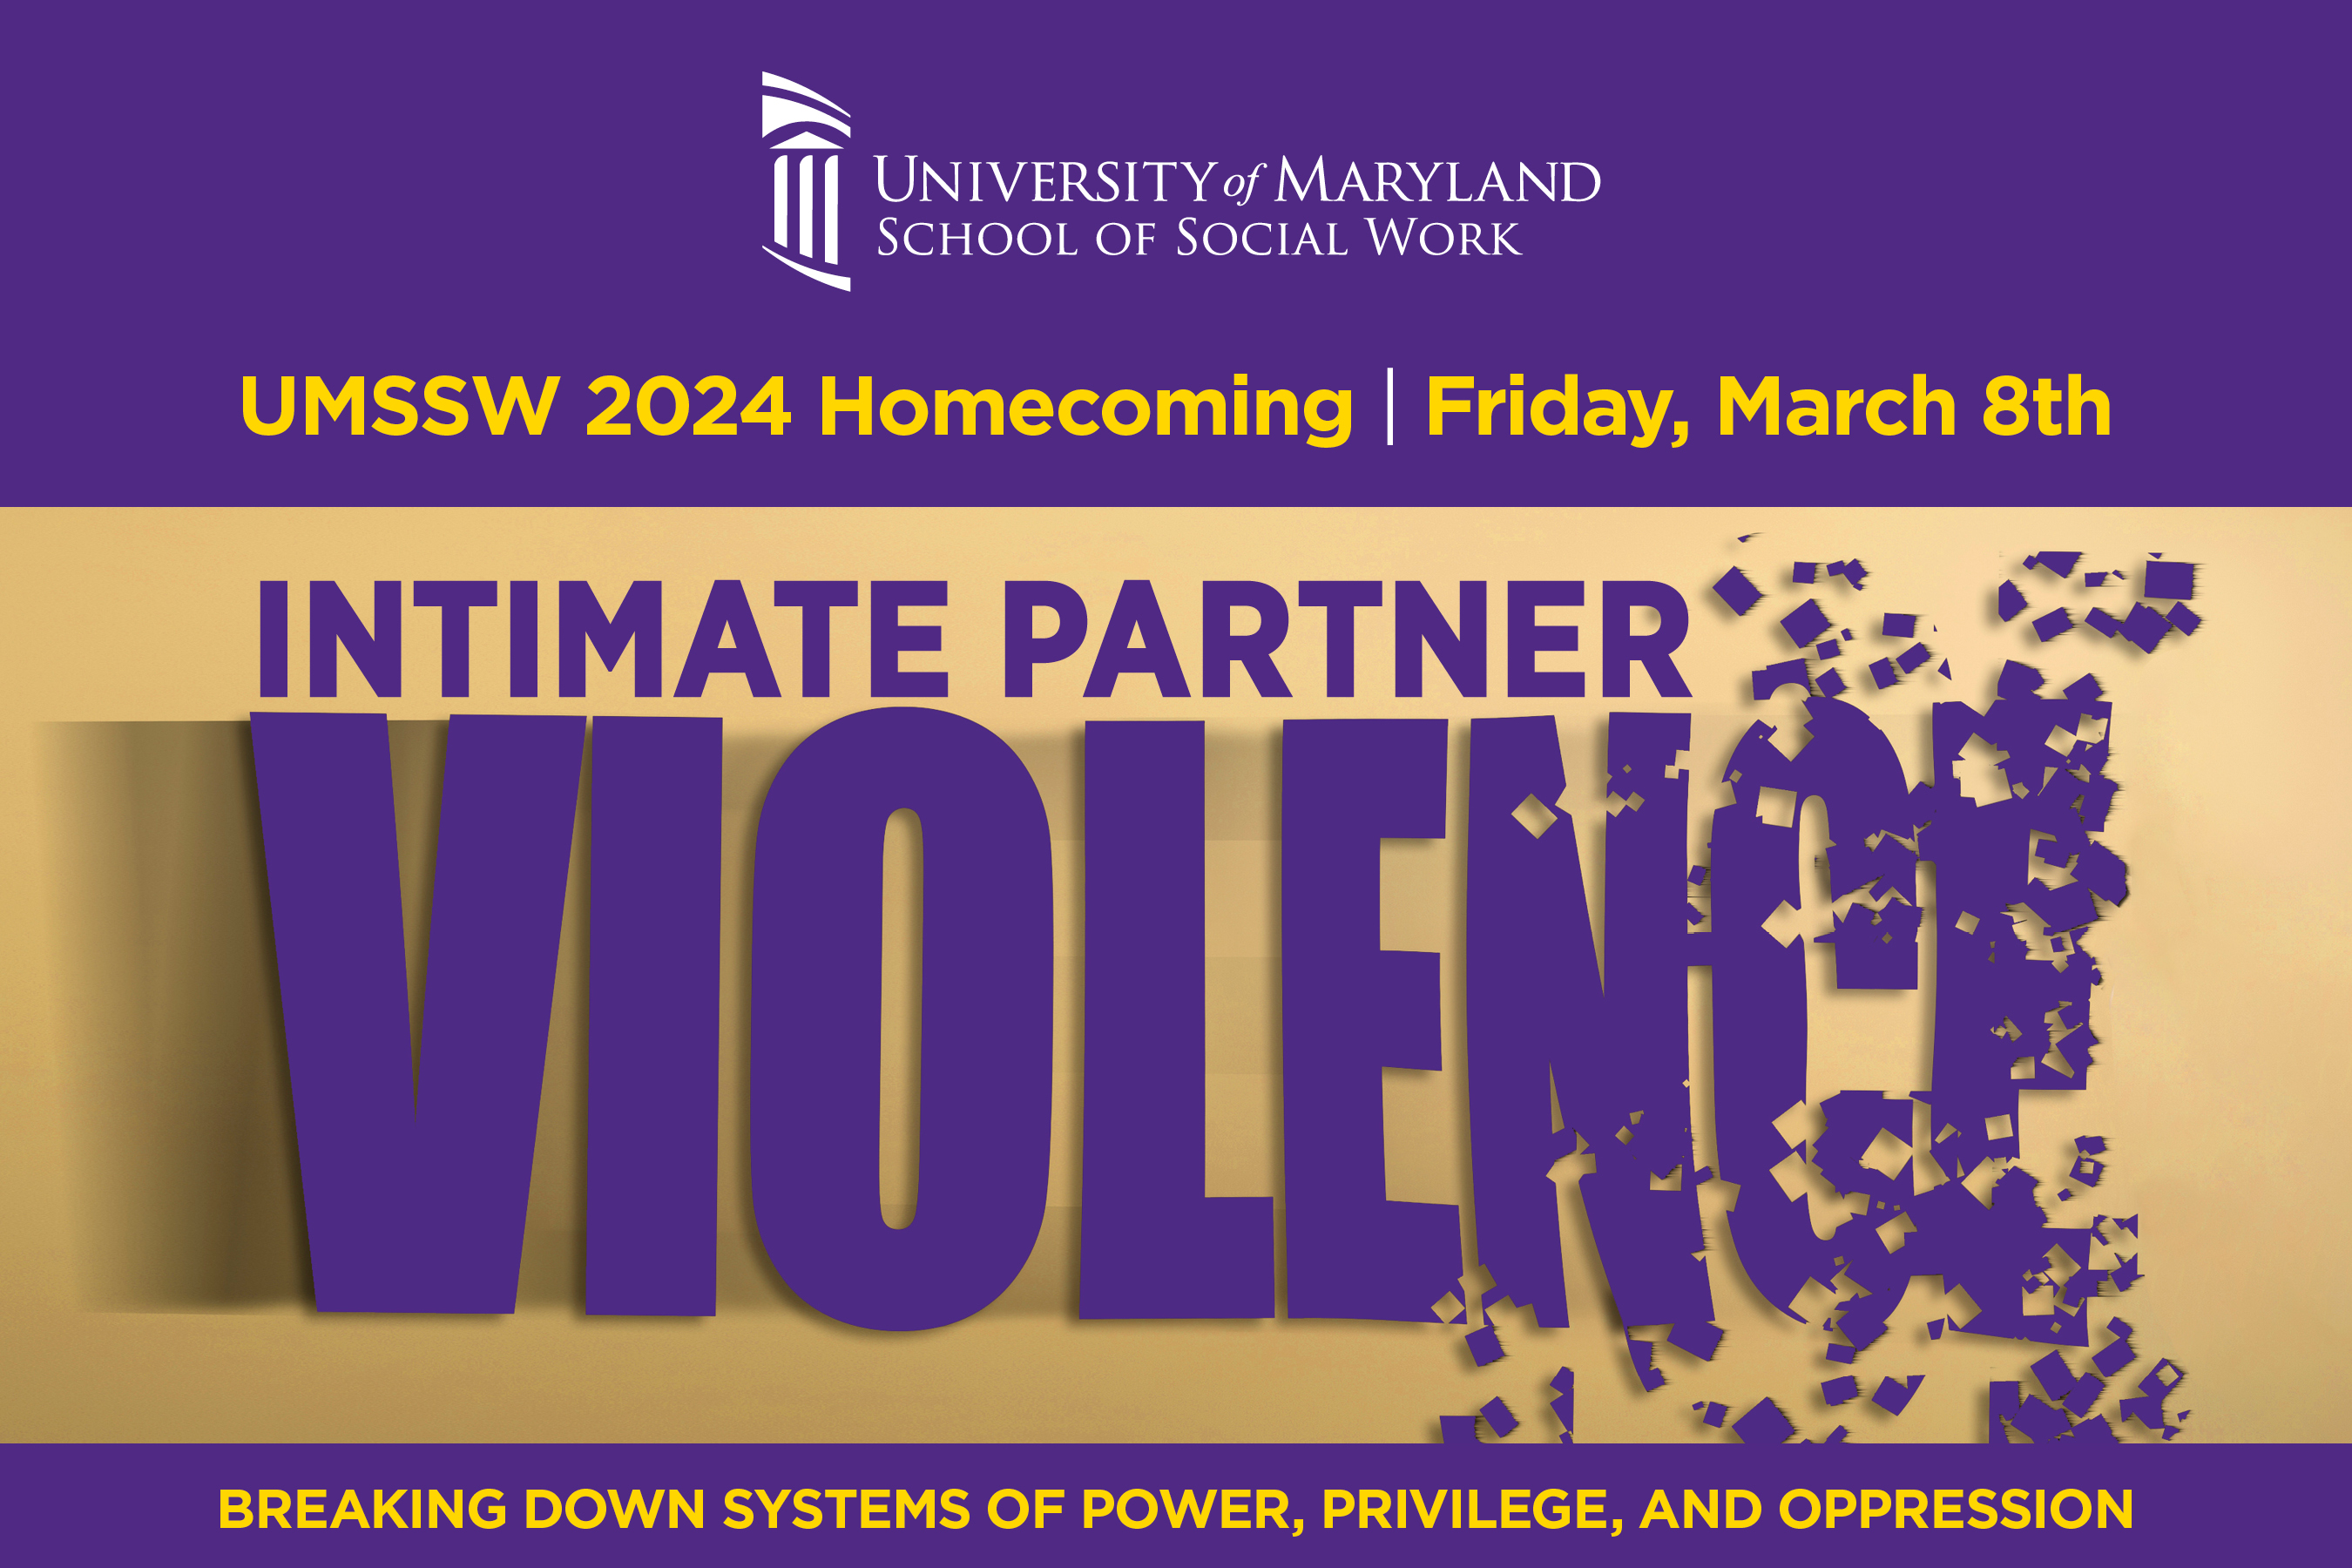 Intimate Partner Violence. UMSSW 2024 homecoming friday march 8th